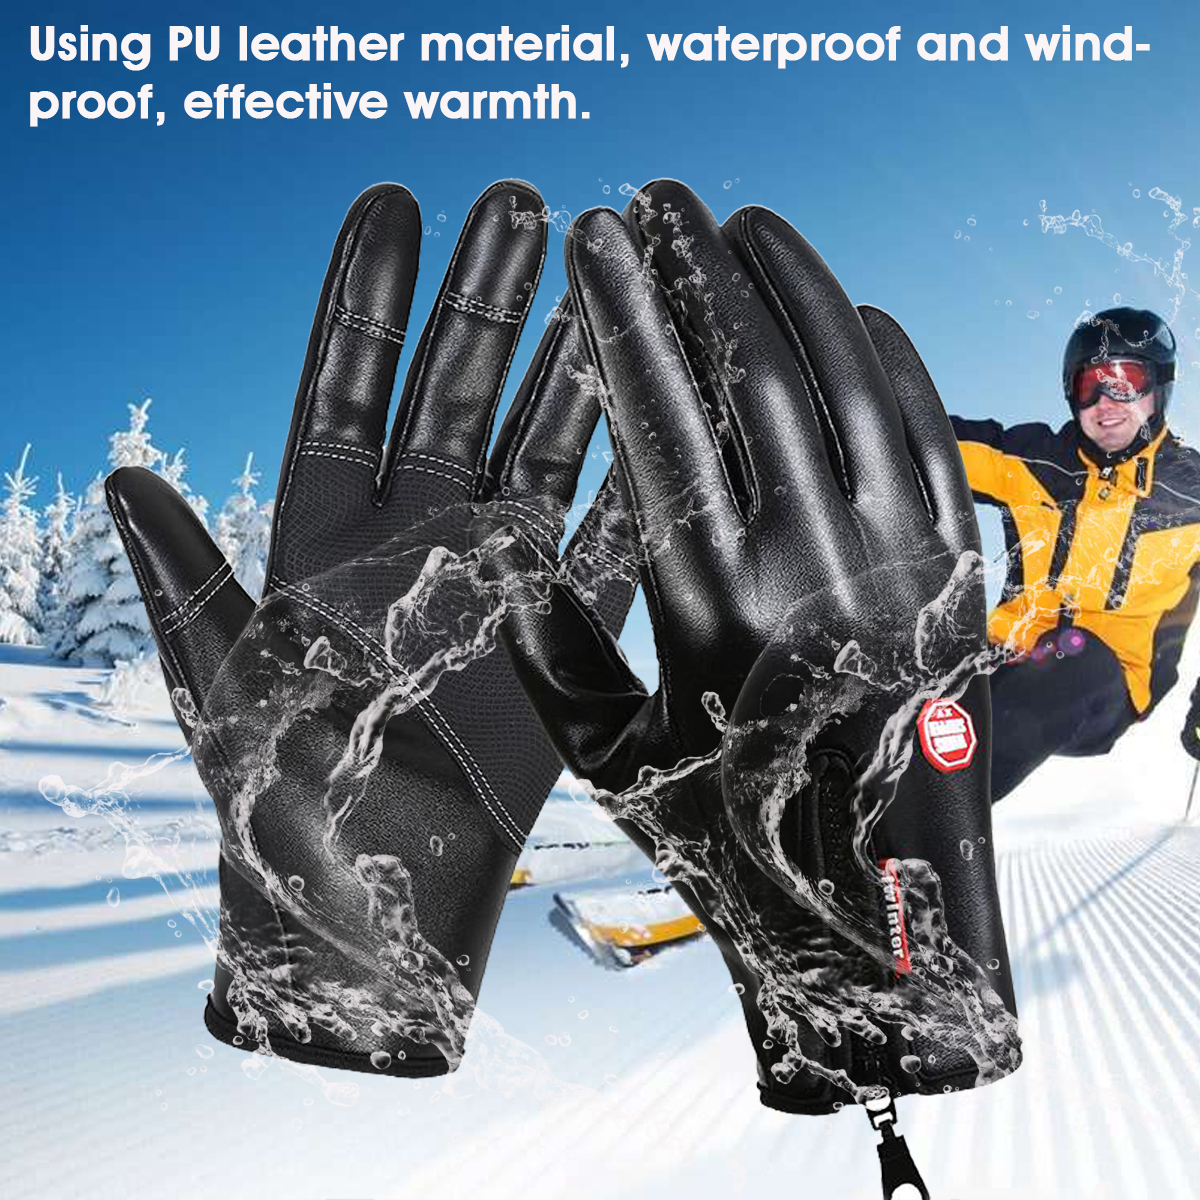 Winter-Warm-Touch-Screen-PU-Leather-Gloves-Ski-Snow-Snowboard-Cycling-Waterproof-Windproof-Gloves-1923190-3